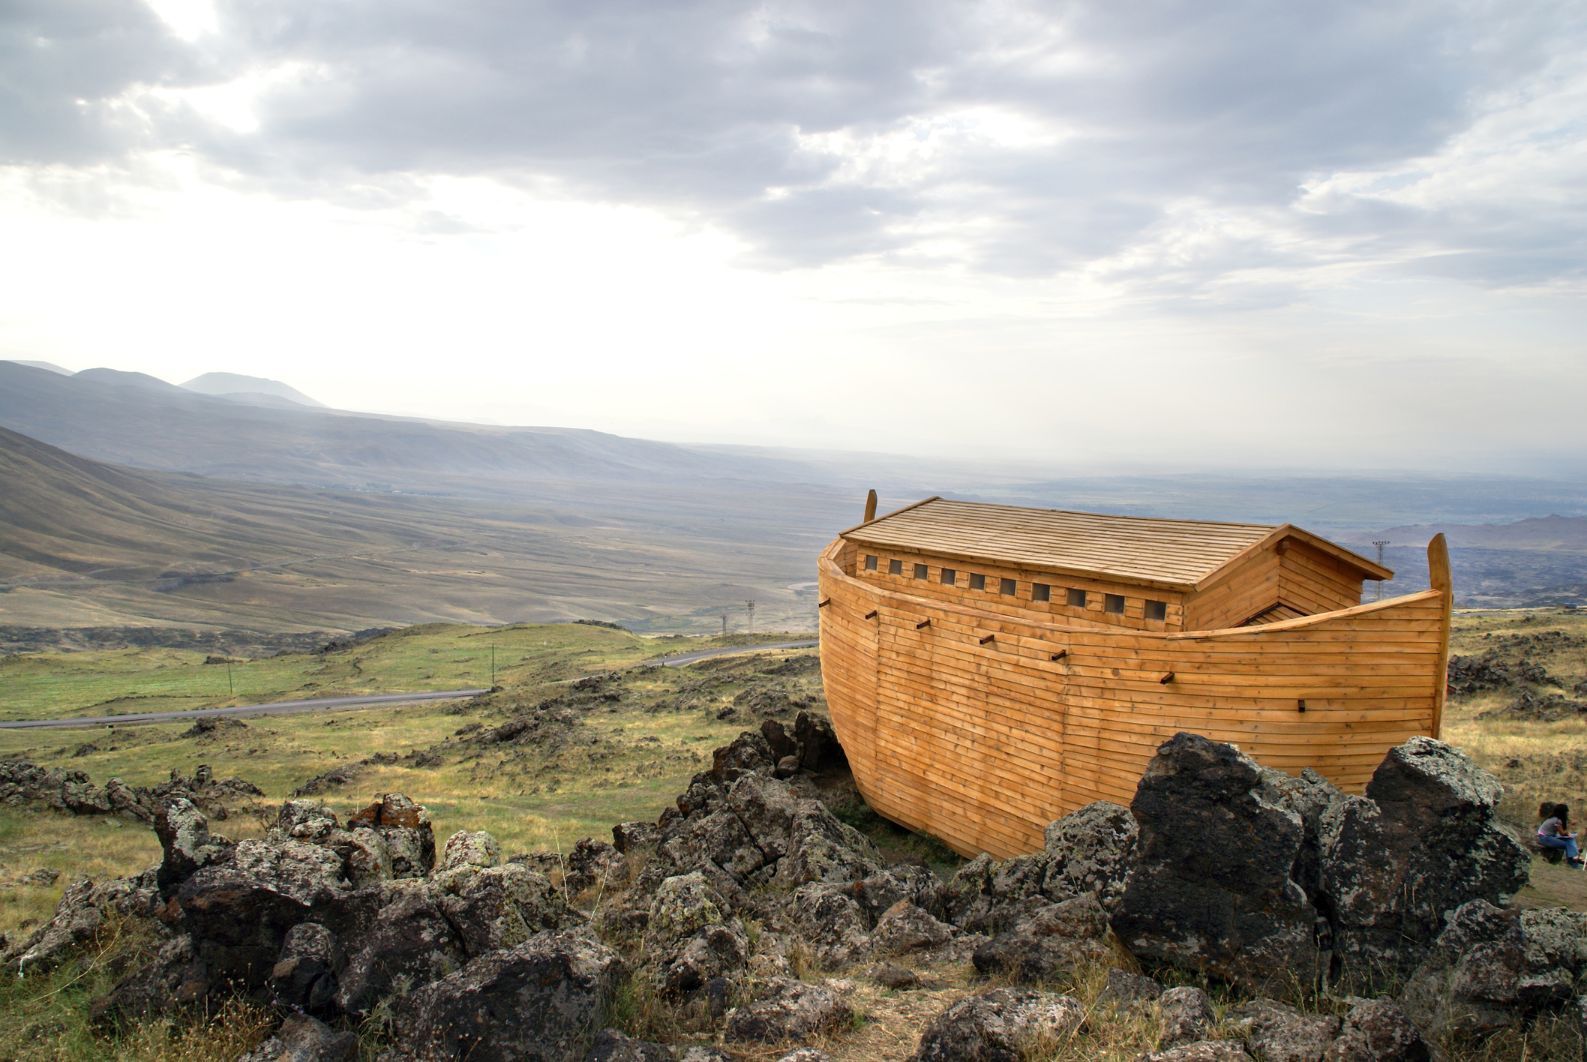 A model of Noah's Ark which was placed on Mount Ararat